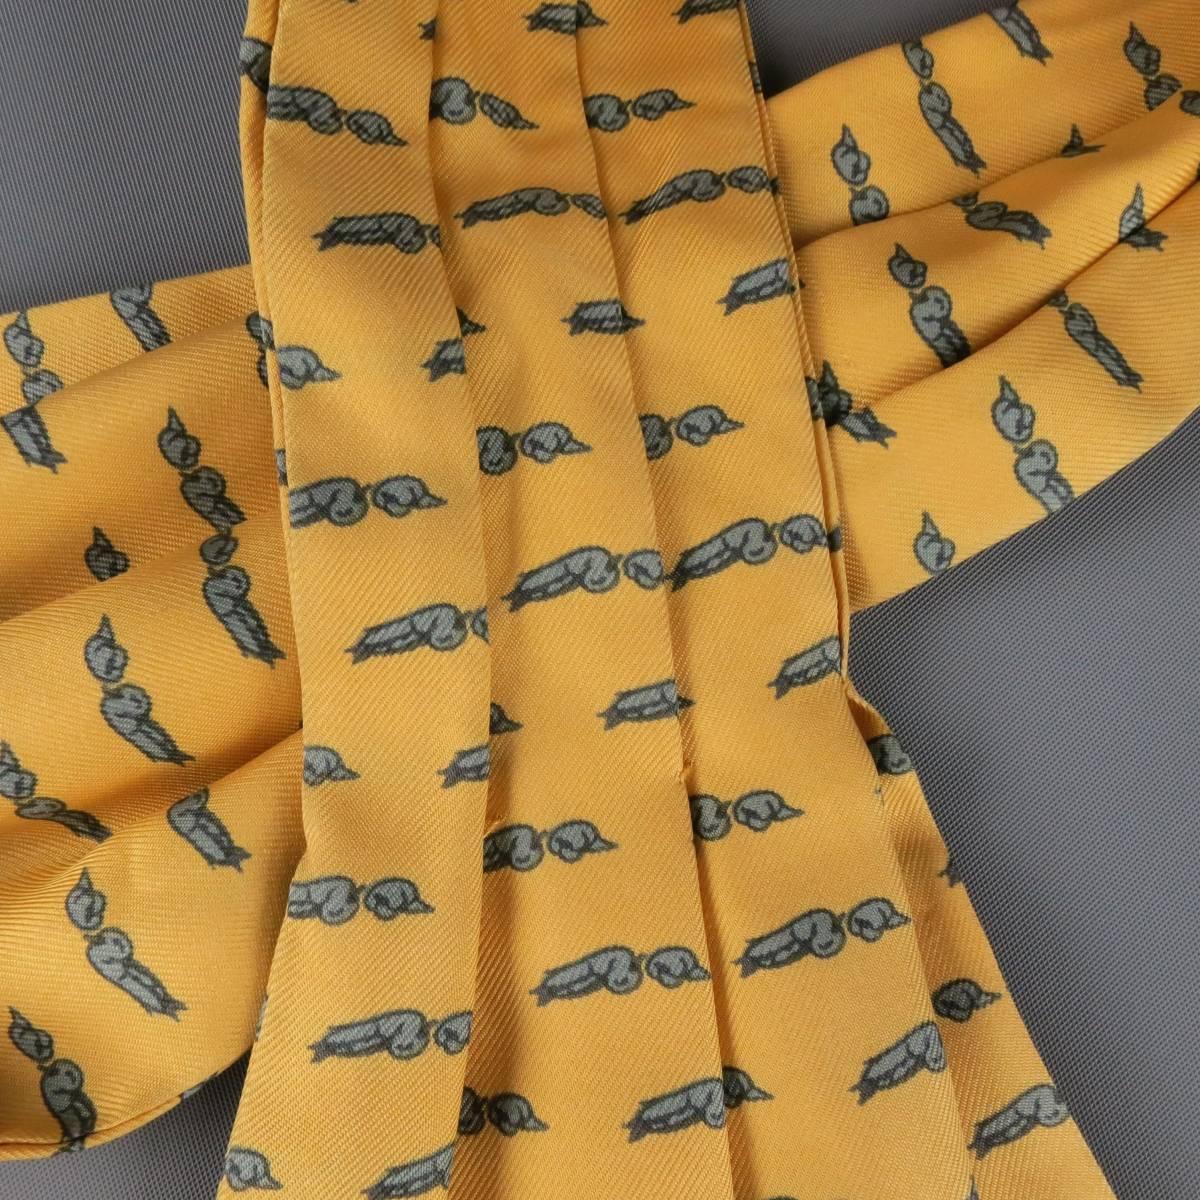 Vintage HERMES gold yellow silk twill ascot features a grey bird print. Made in France.
 
Good Pre-Owned Condition.
 
Measurements:
 
Length: 45.5 in.
Width: 6.65 in.